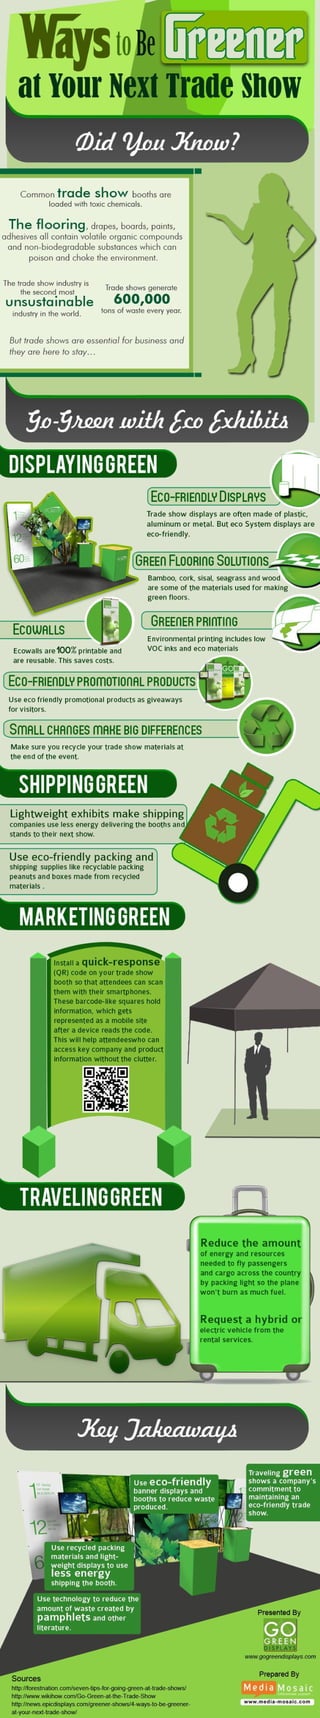 Ways to be greener at your next trade show